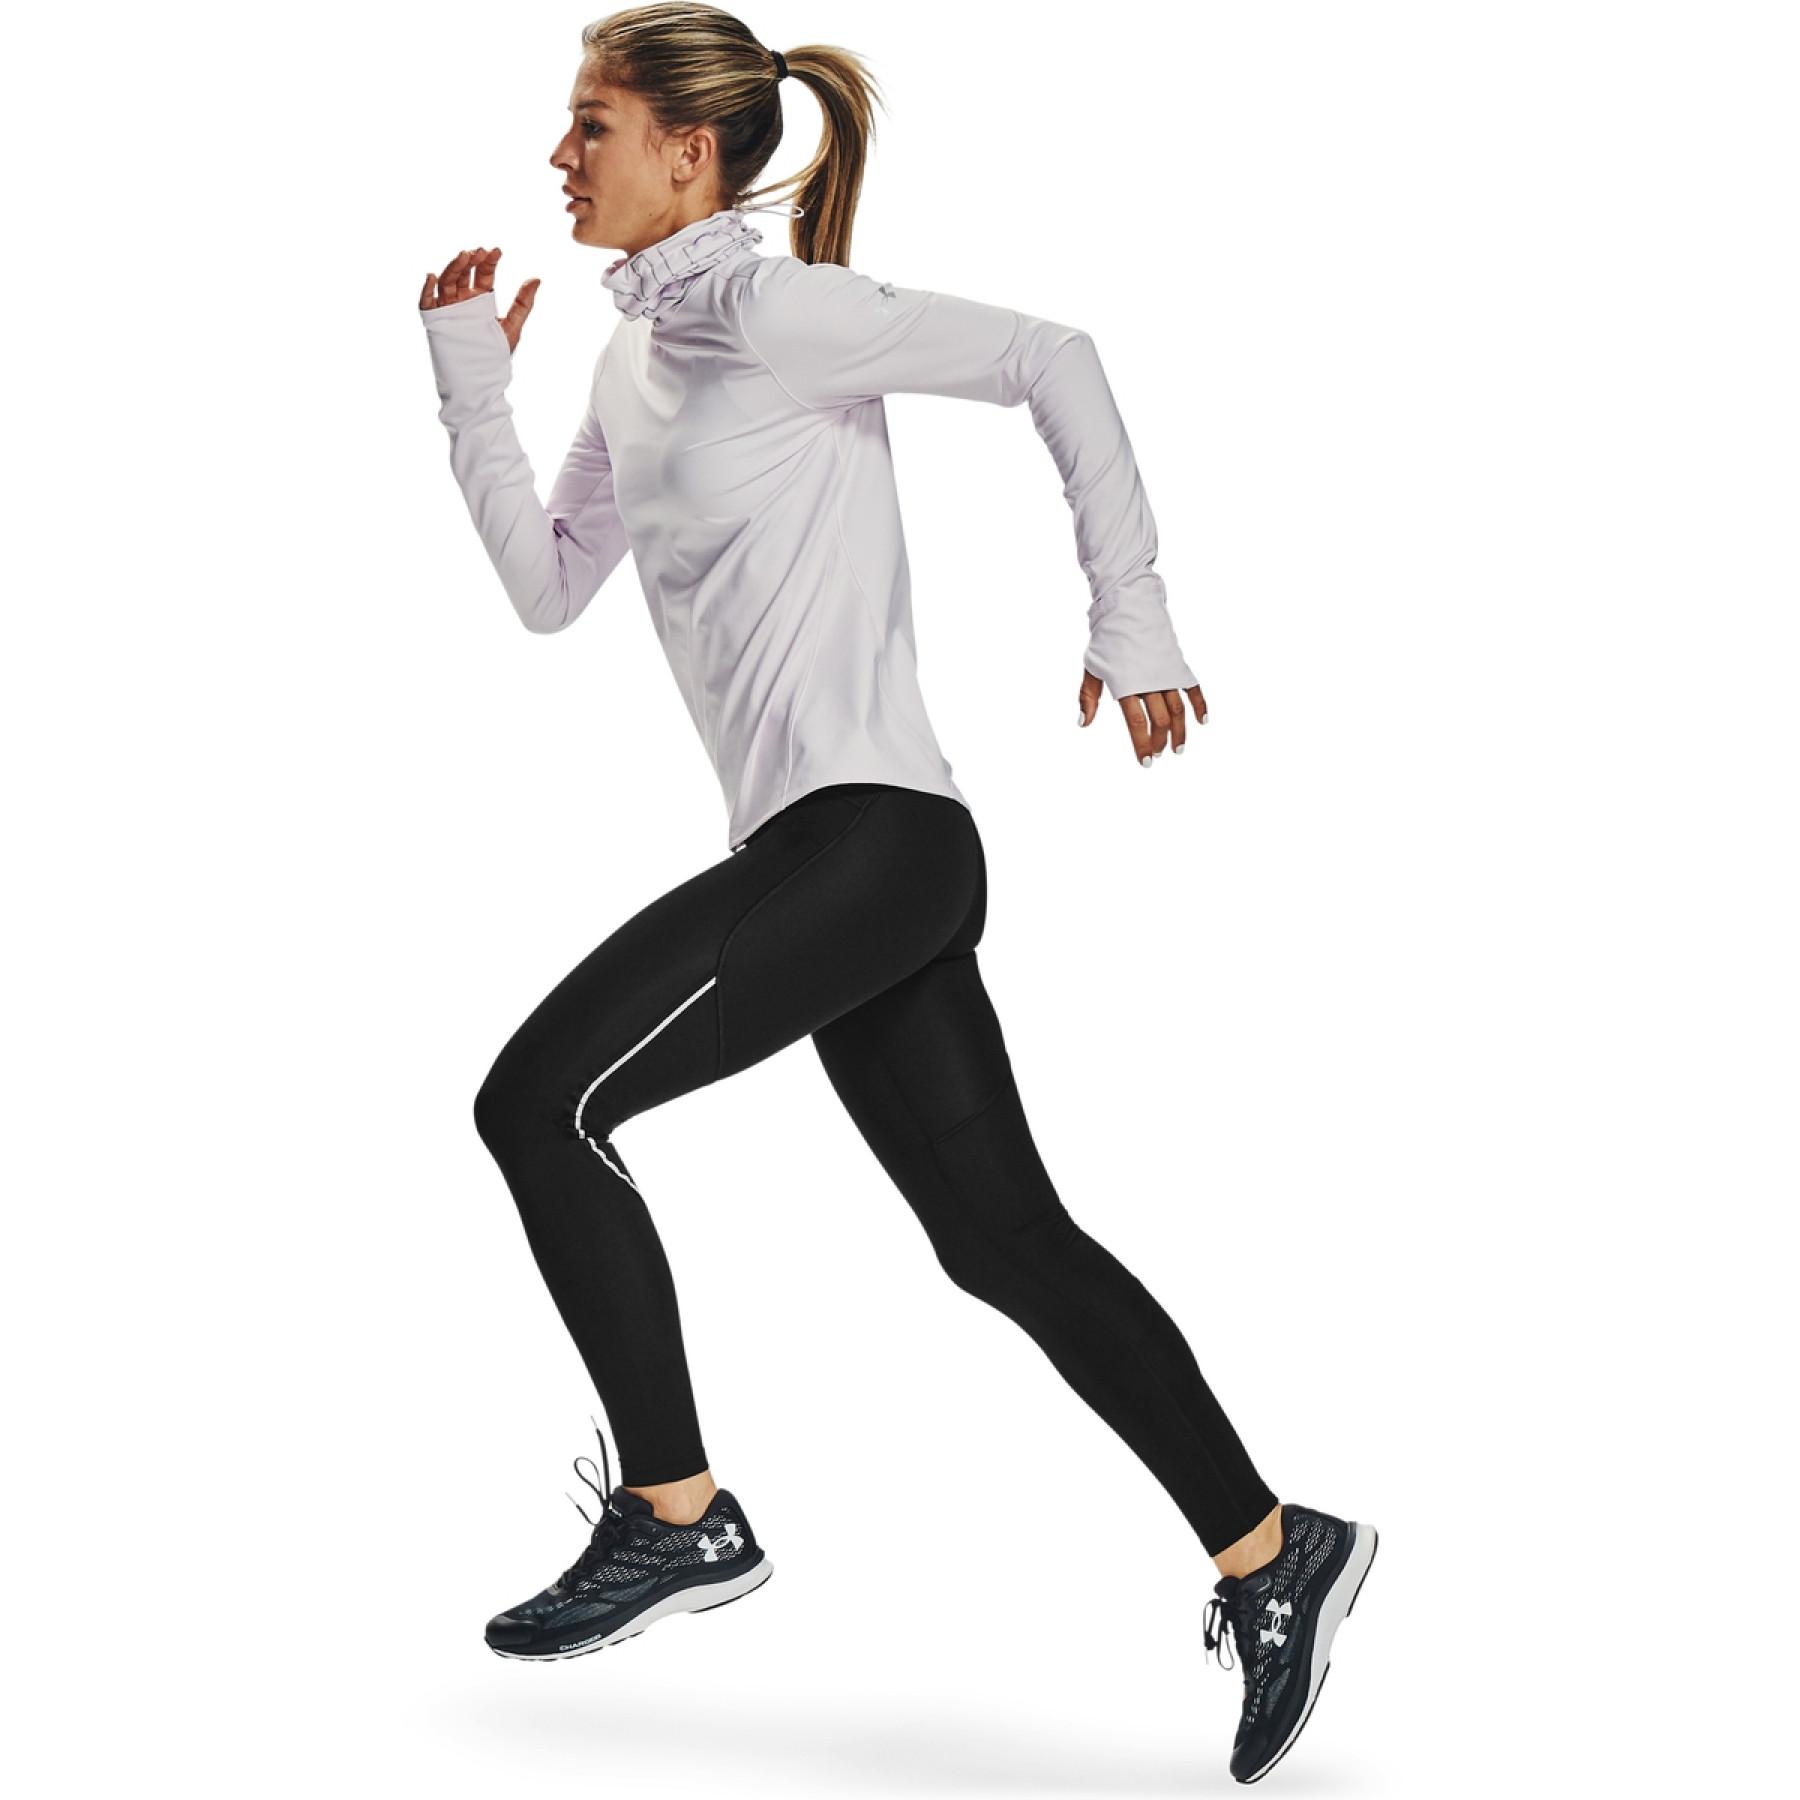 Legging mulher Under Armour Fly Fast 2.0 ColdGear